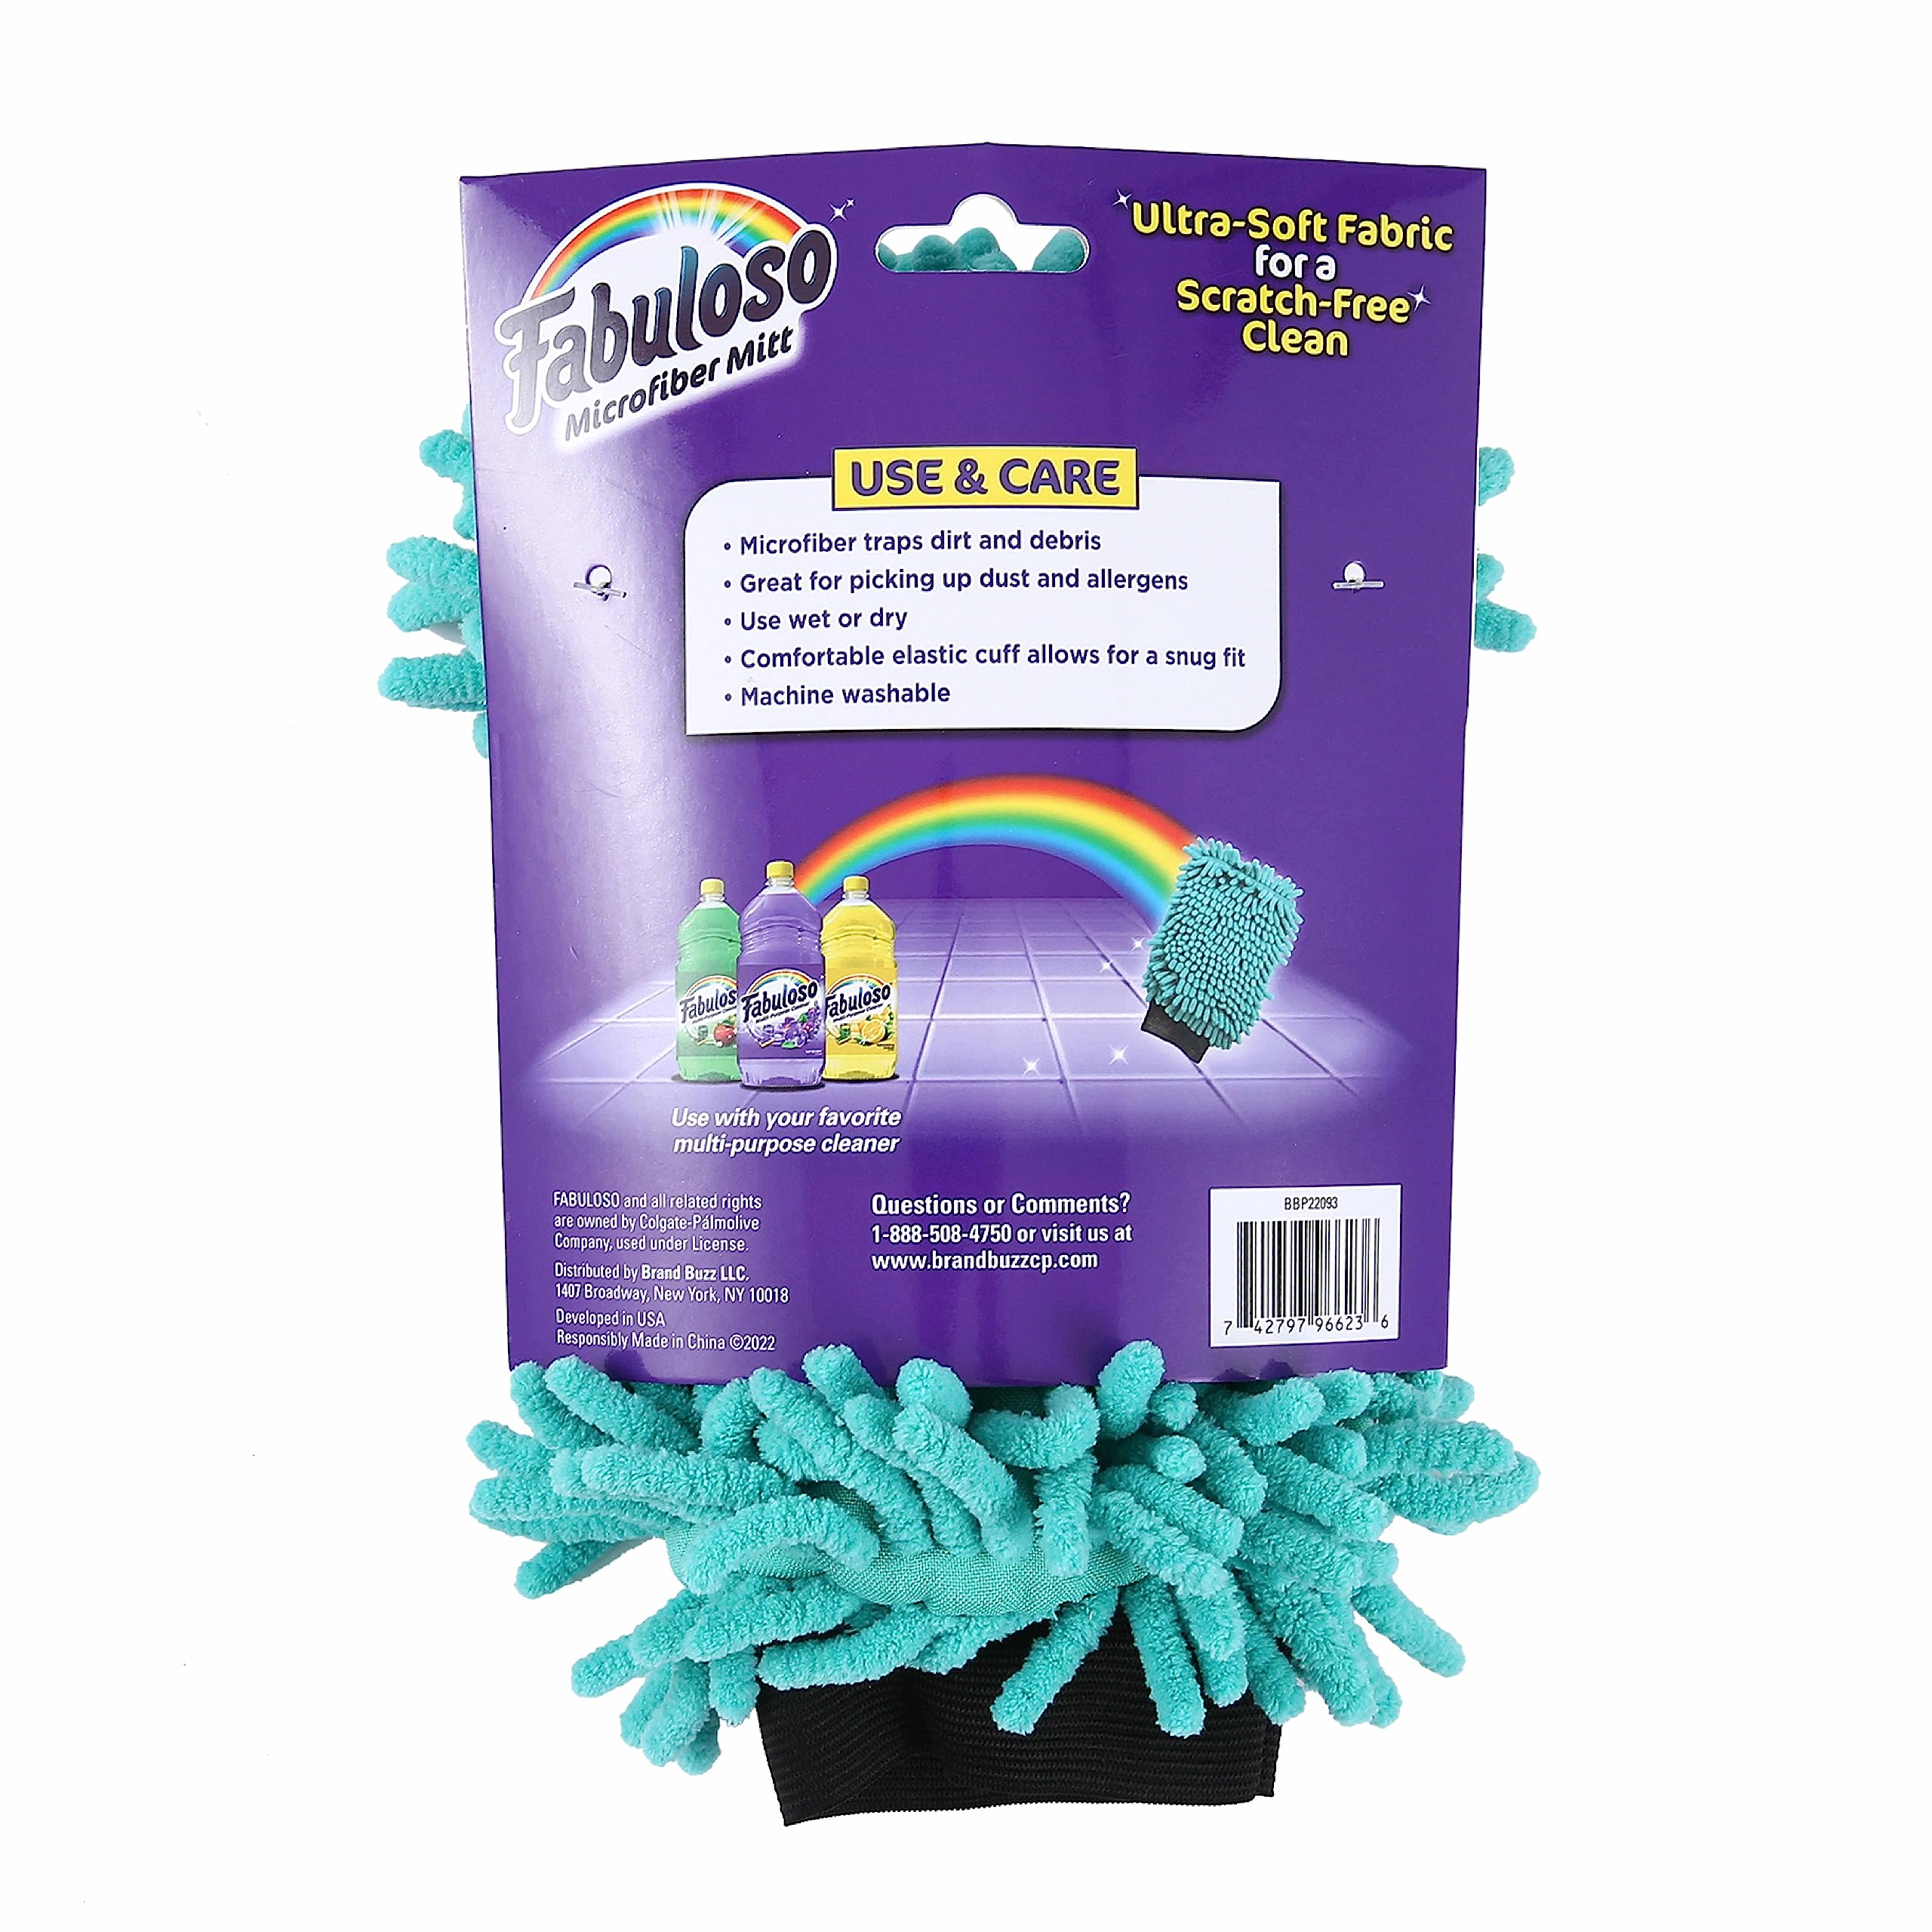 Fabuloso Microfiber Cleaning Mitt, Teal, One Size Fits All | Lint-Free, Scratch-Free Cleaning Glove for Surfaces and Furniture | Microfiber Dustless Hand Cloth for Bold and Bright Cleaning Experience